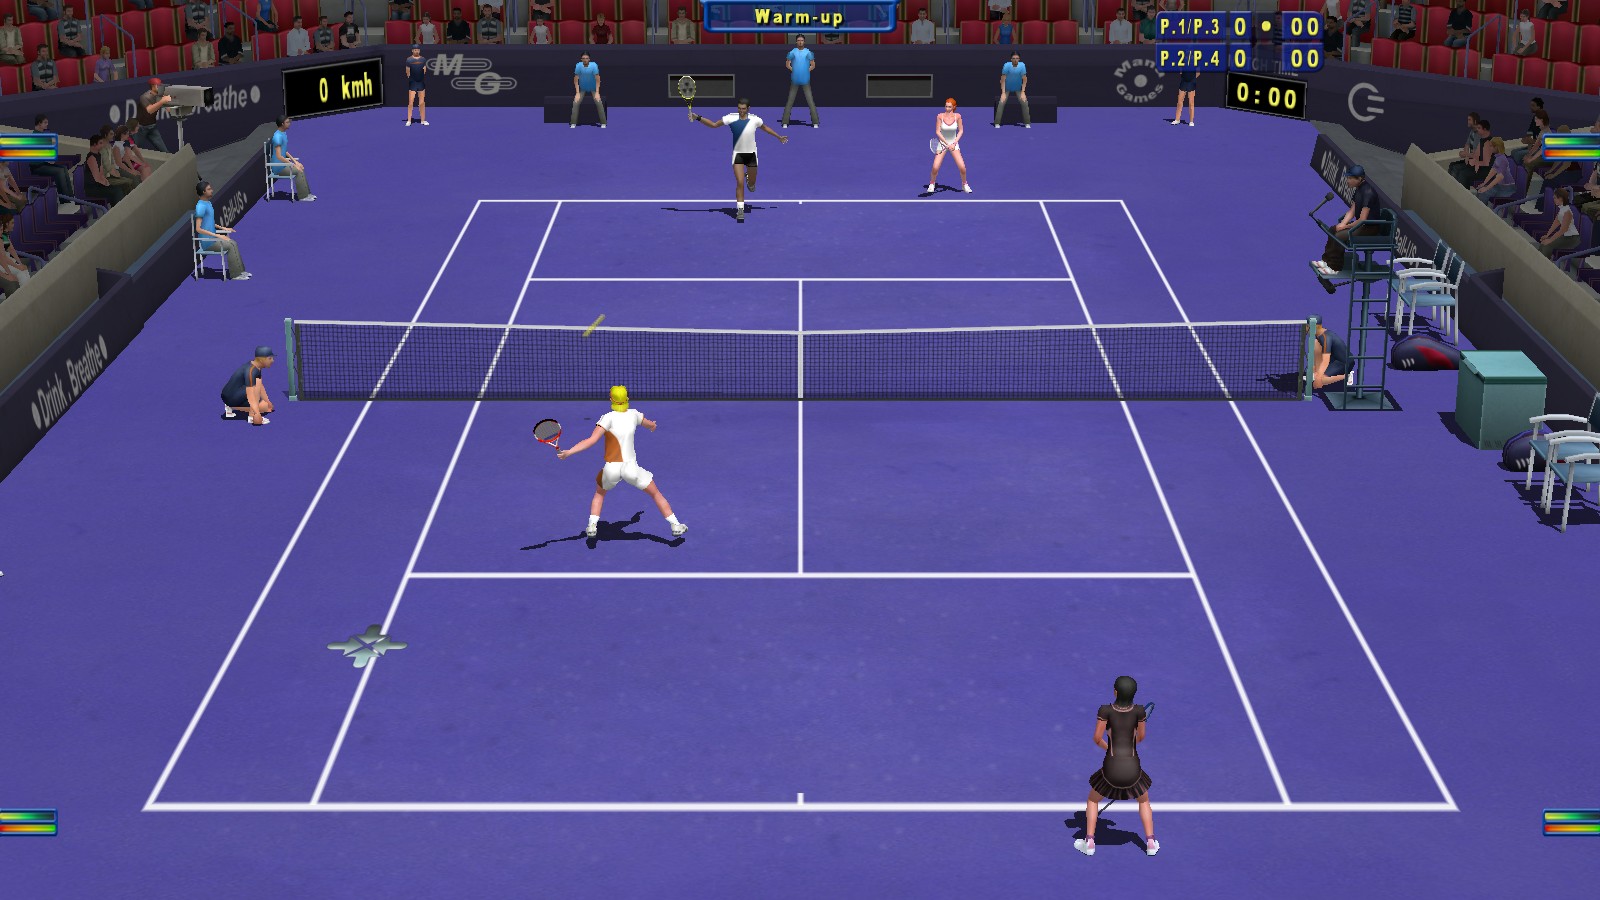 Save 34% on Tennis Elbow 2013 on Steam